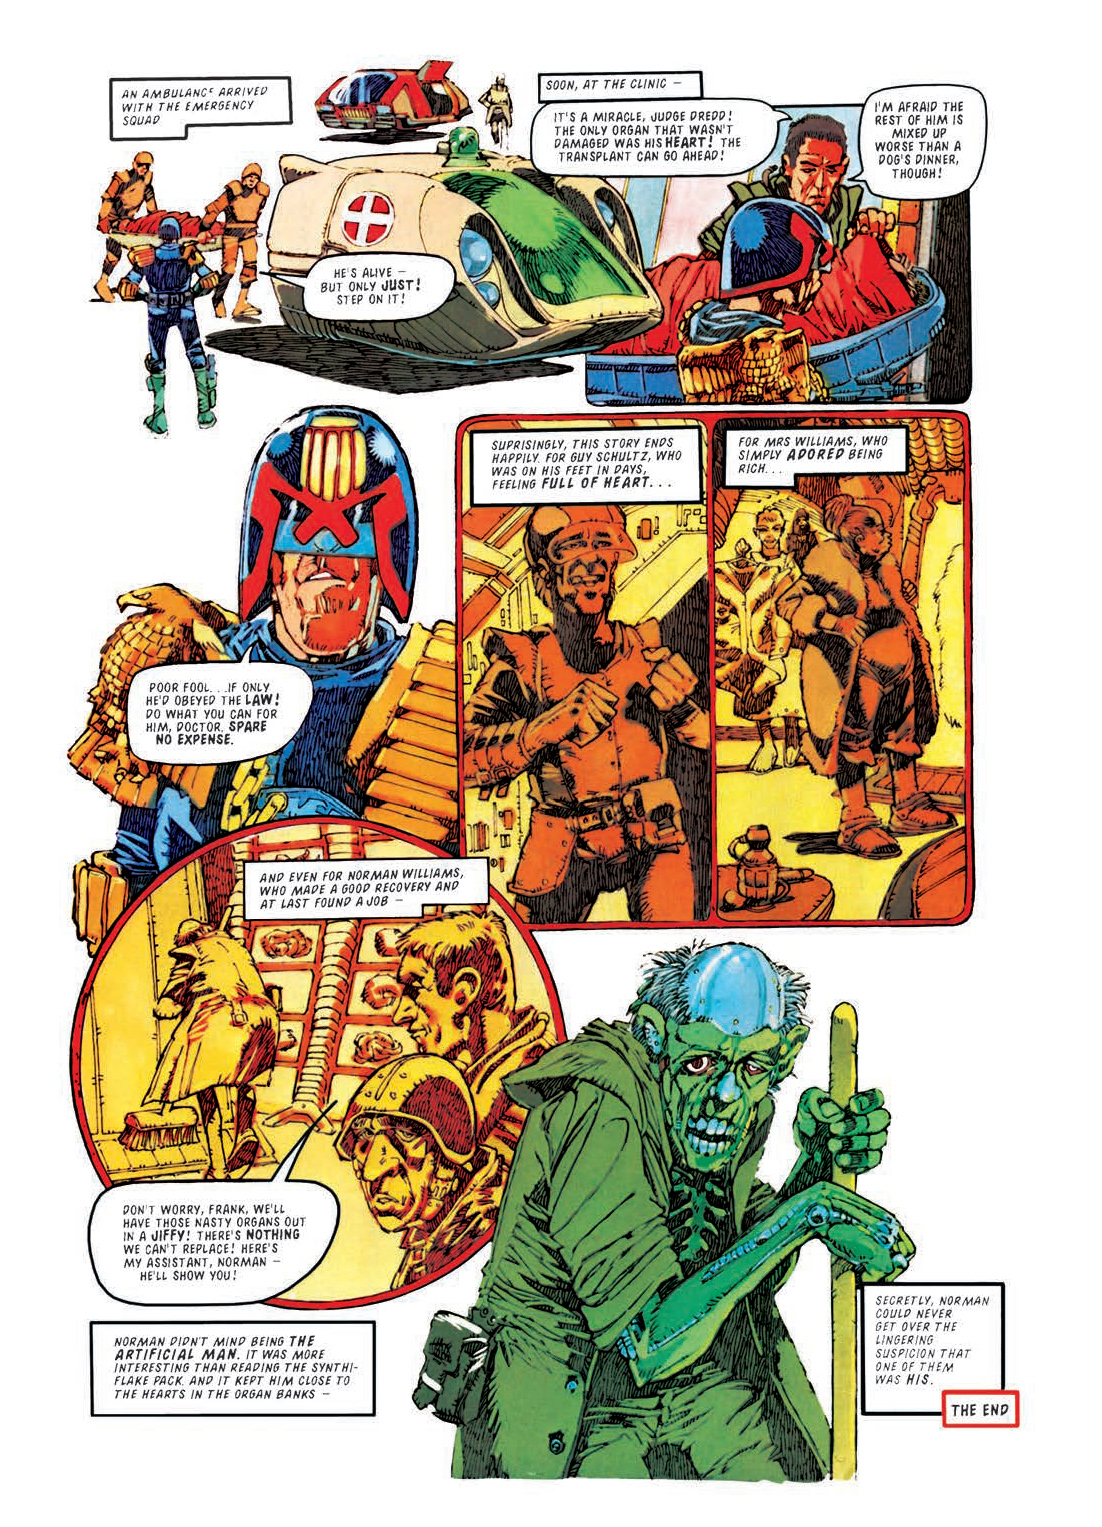 Read online Judge Dredd: The Restricted Files comic -  Issue # TPB 1 - 100